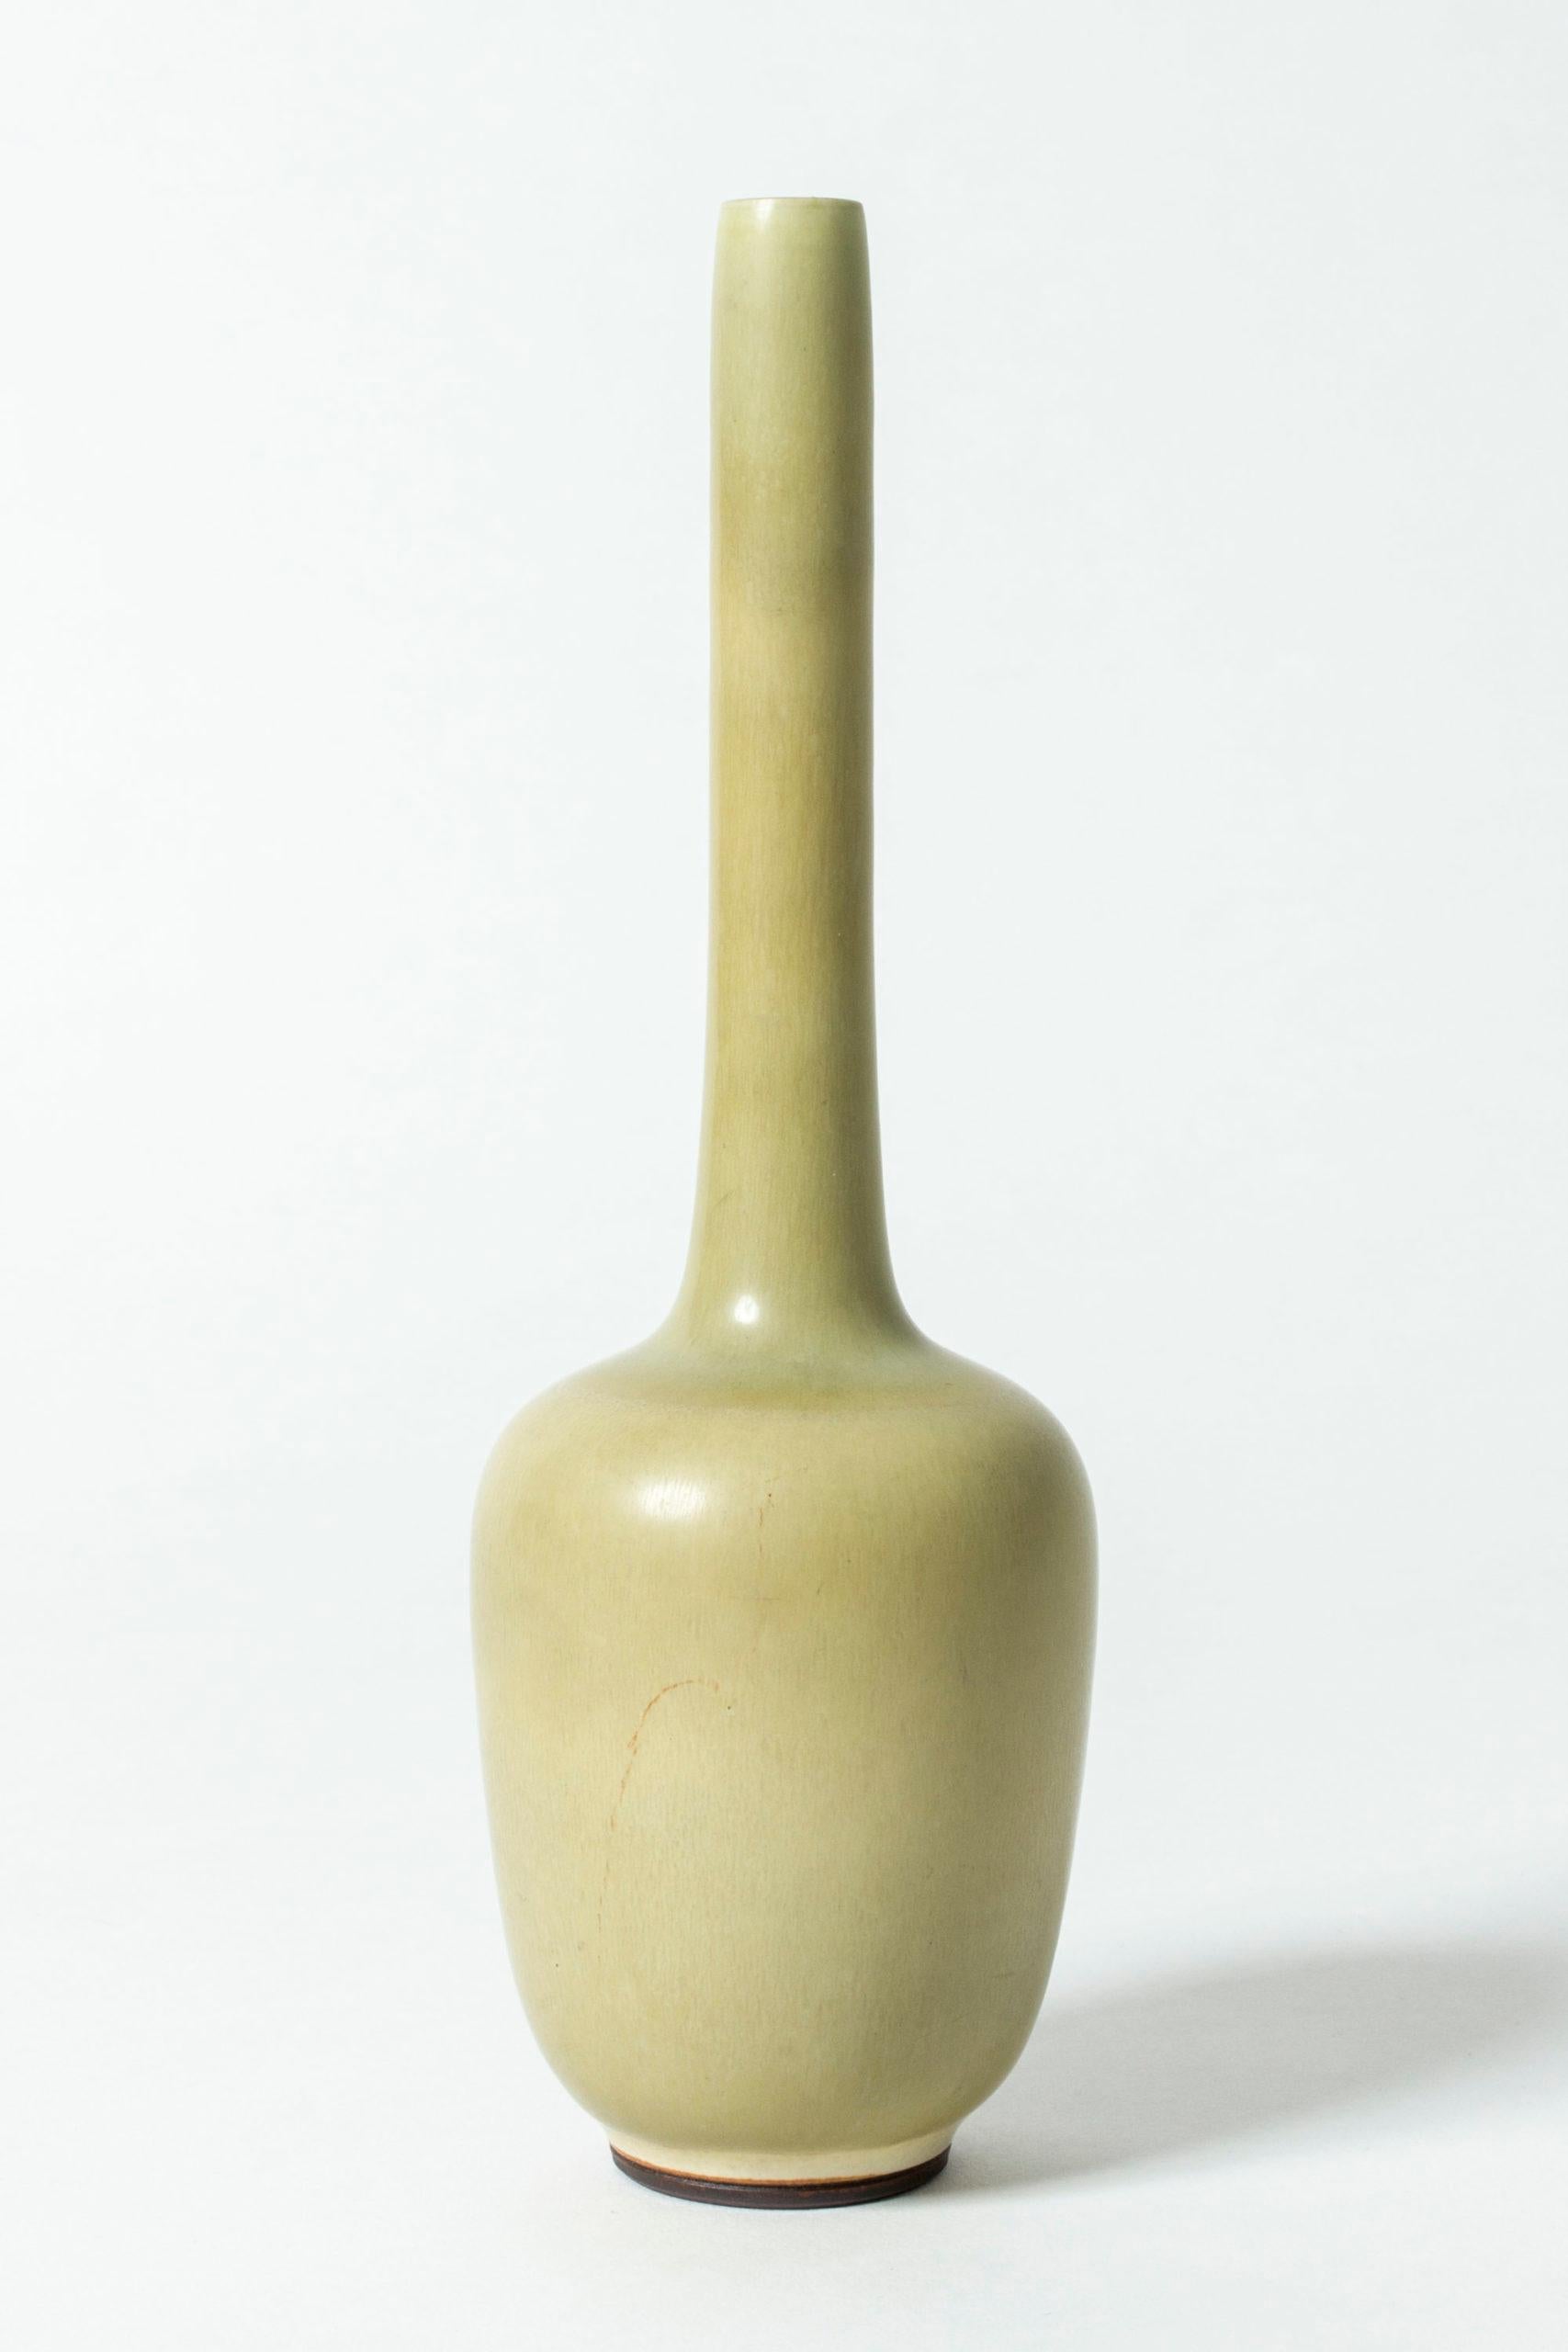 Stoneware vase by Berndt Friberg, in an interesting shape with an elongated, cylinder formed neck. Pale yellow hare’s fur glaze.


About Berndt Friberg: 
Berndt Friberg was a Swedish ceramicist, renowned for his stoneware vases and vessels for